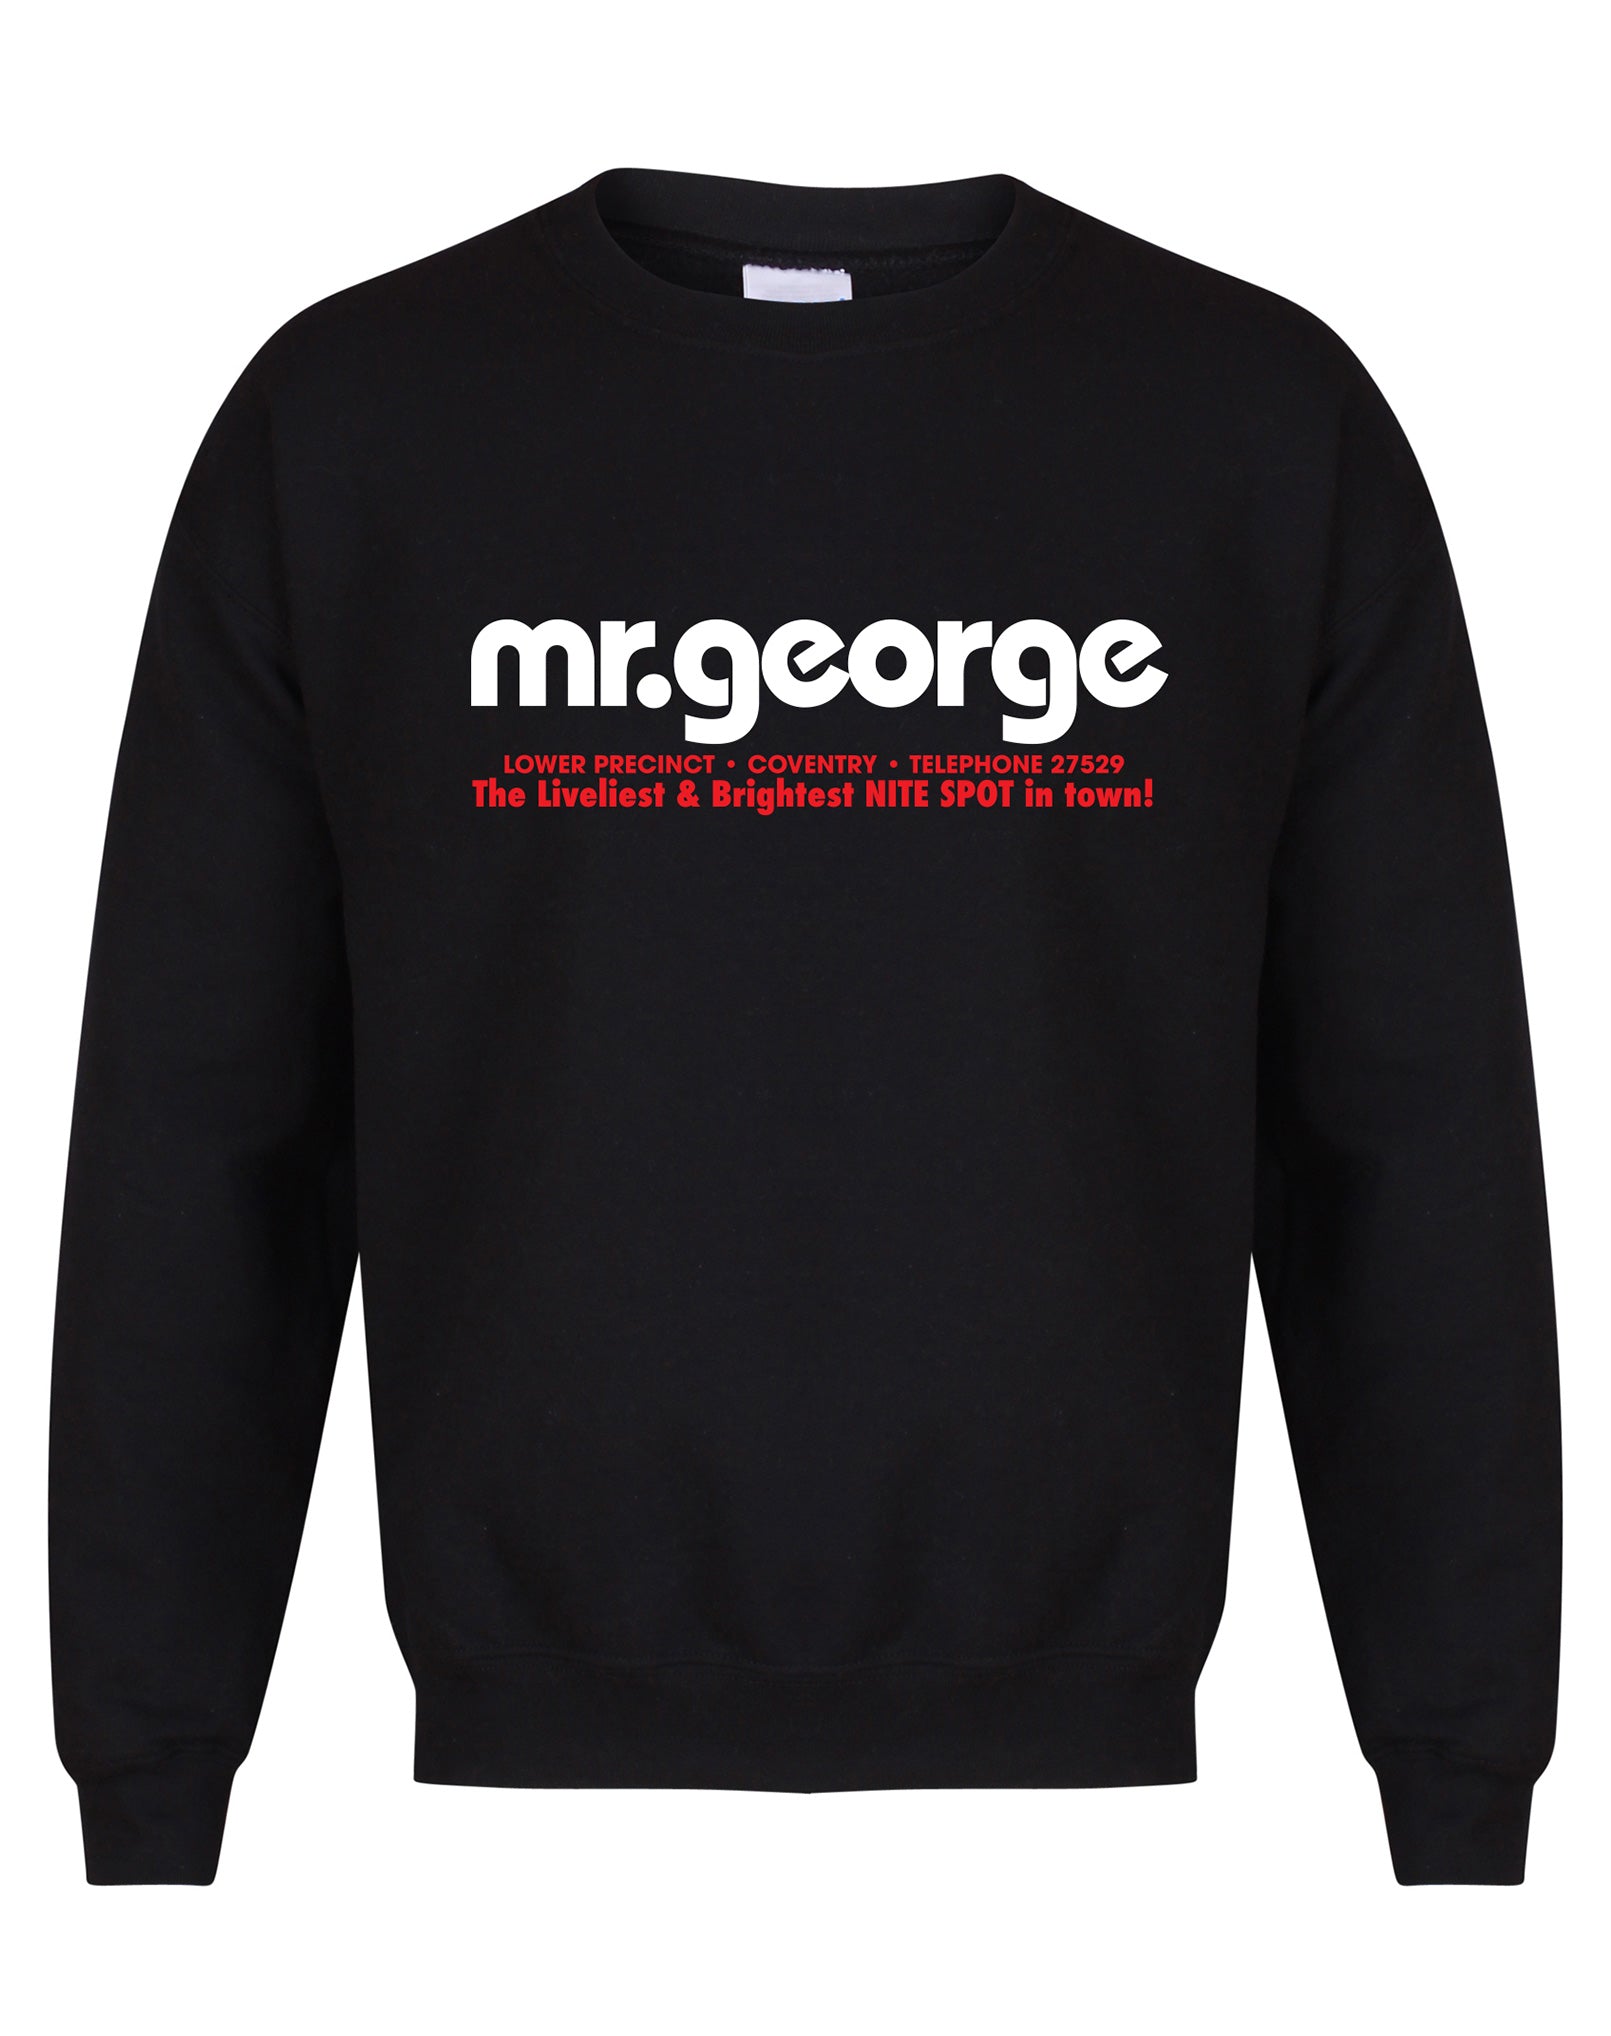 Mr George unisex sweatshirt - various colours - Dirty Stop Outs